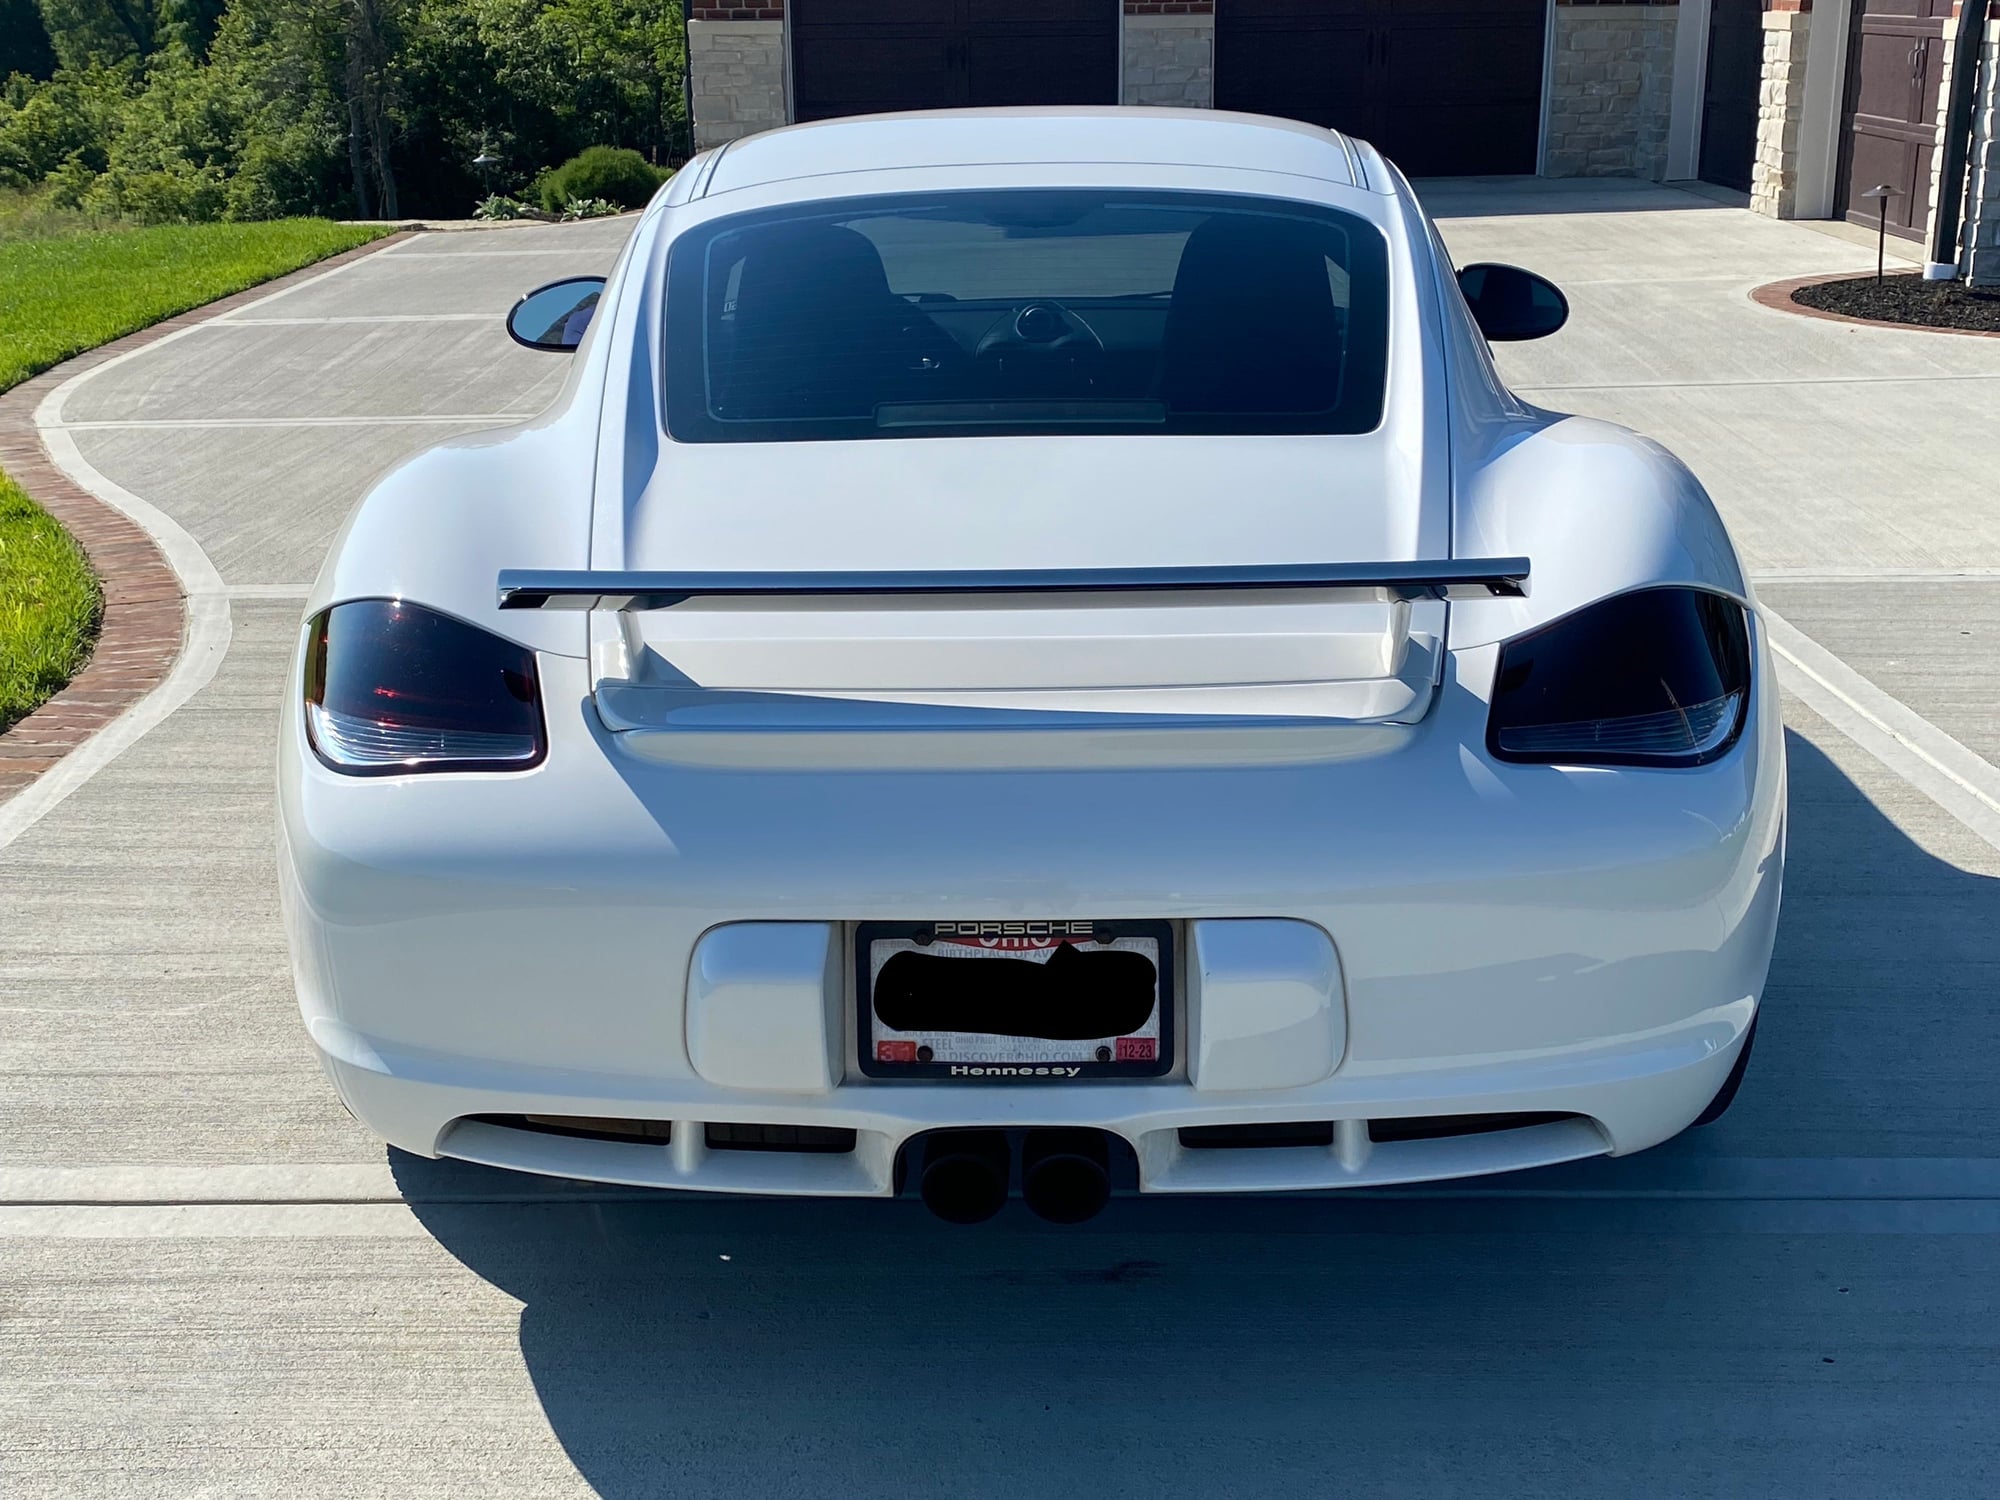 2011 Porsche Cayman -  - Used - VIN WP0AB2A84BU780711 - 6 cyl - 2WD - Automatic - Coupe - White - Cincinnati, OH 45255, United States